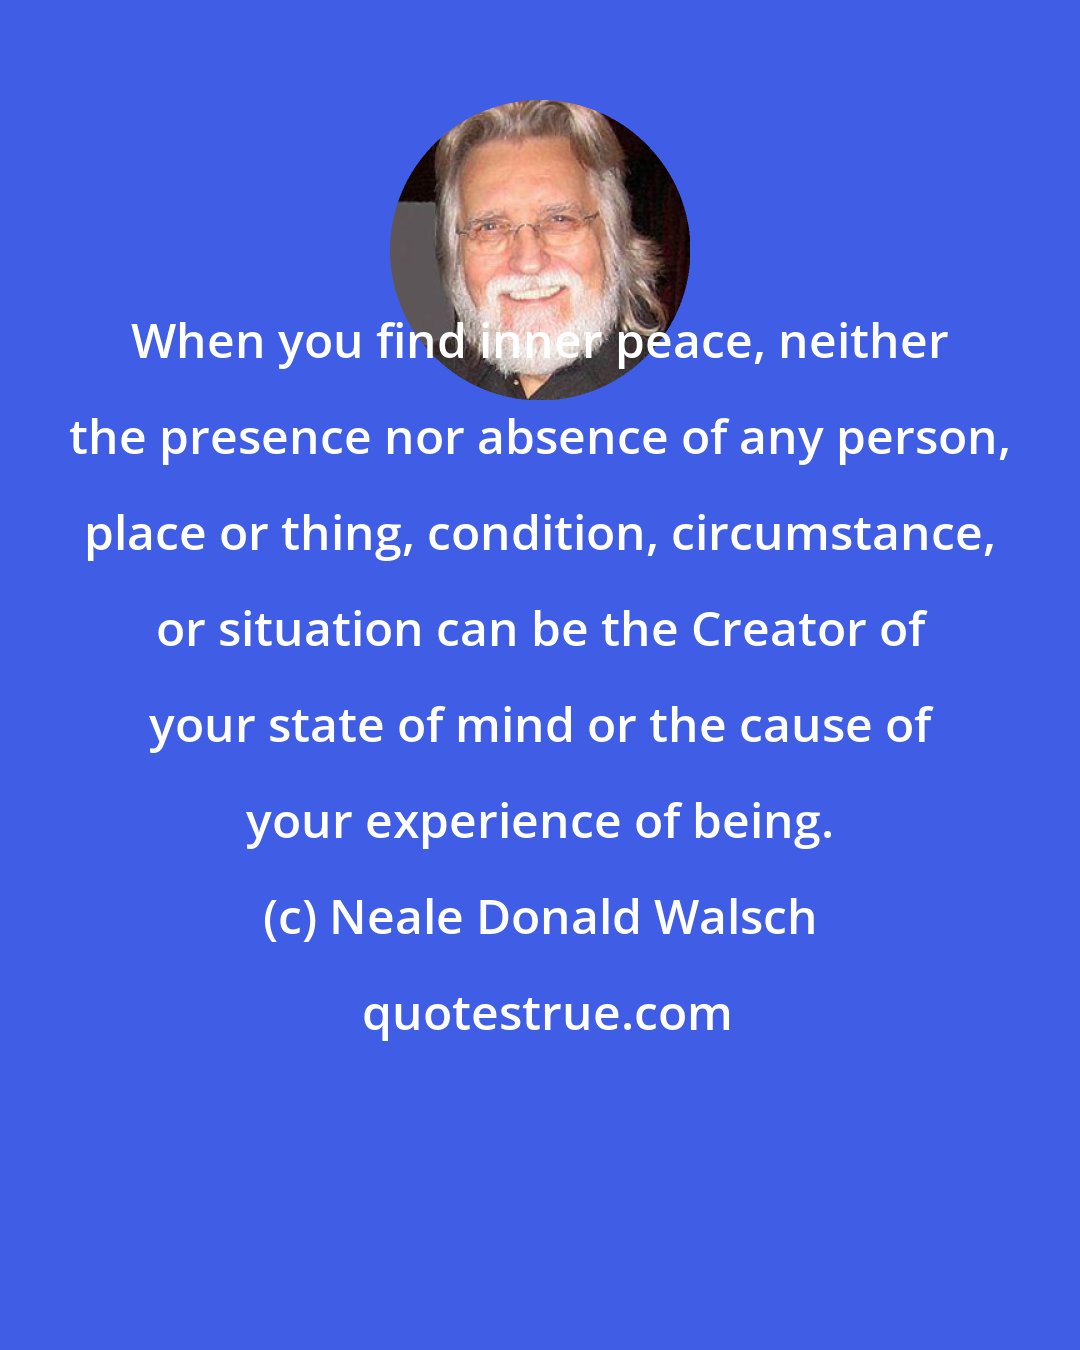 Neale Donald Walsch: When you find inner peace, neither the presence nor absence of any person, place or thing, condition, circumstance, or situation can be the Creator of your state of mind or the cause of your experience of being.